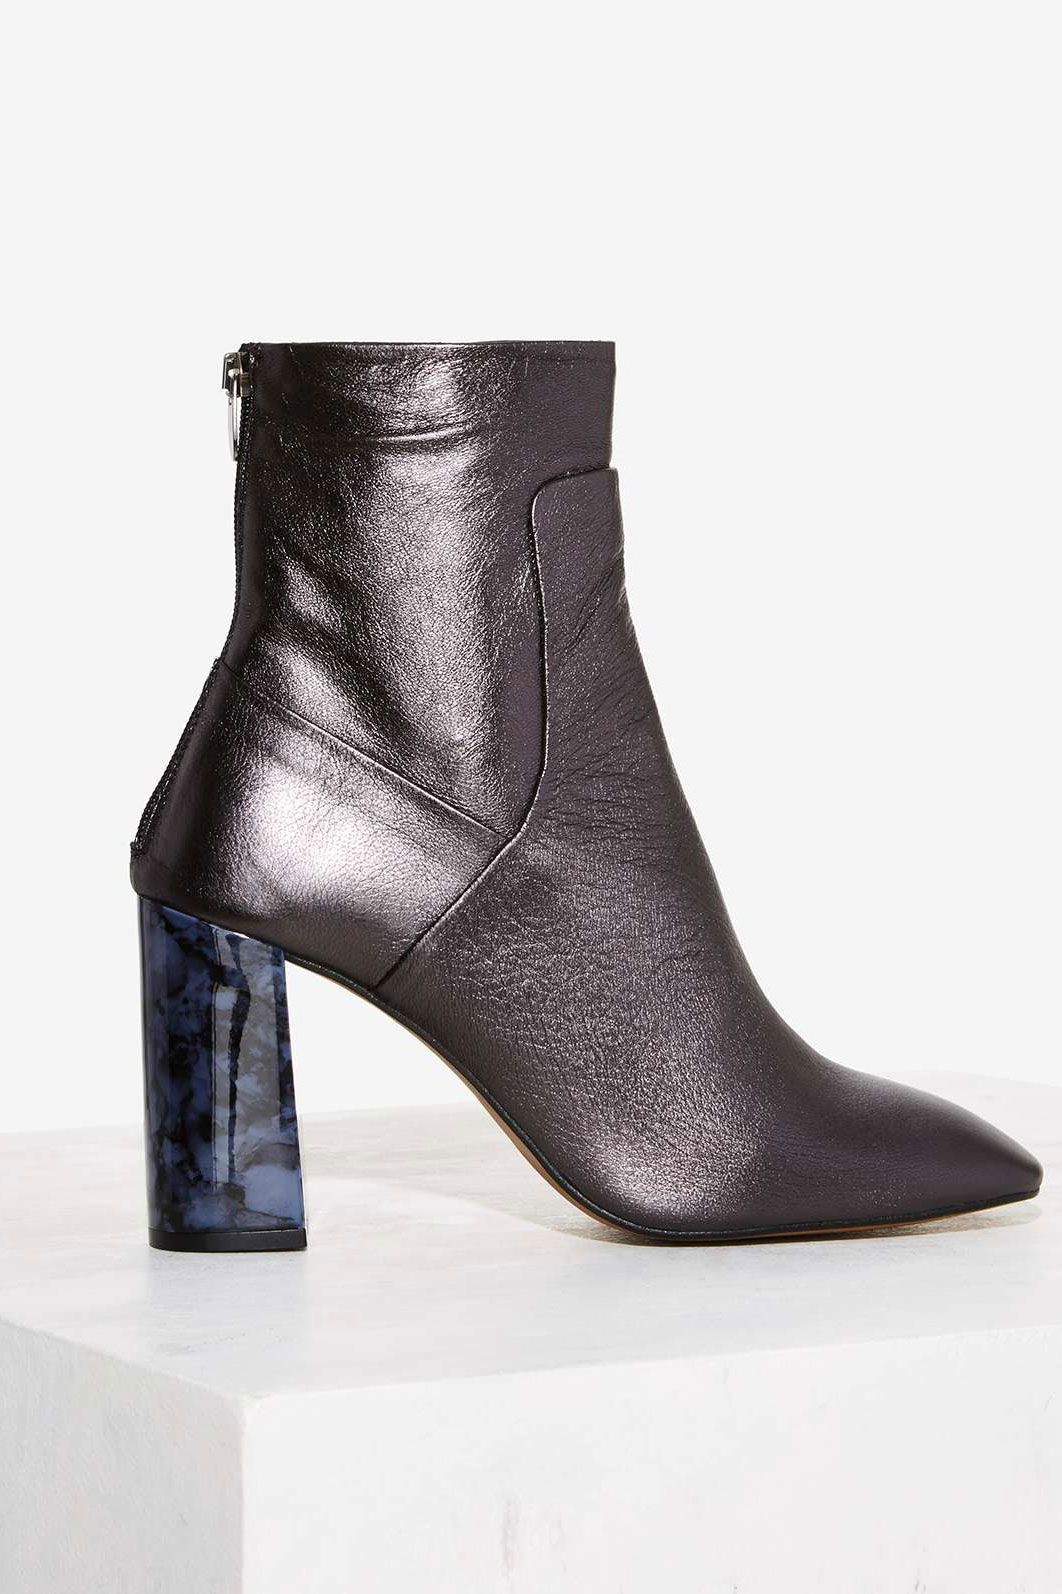 Stretch Suede Ankle Boots Are a New Shoe Trend for Fall 2016